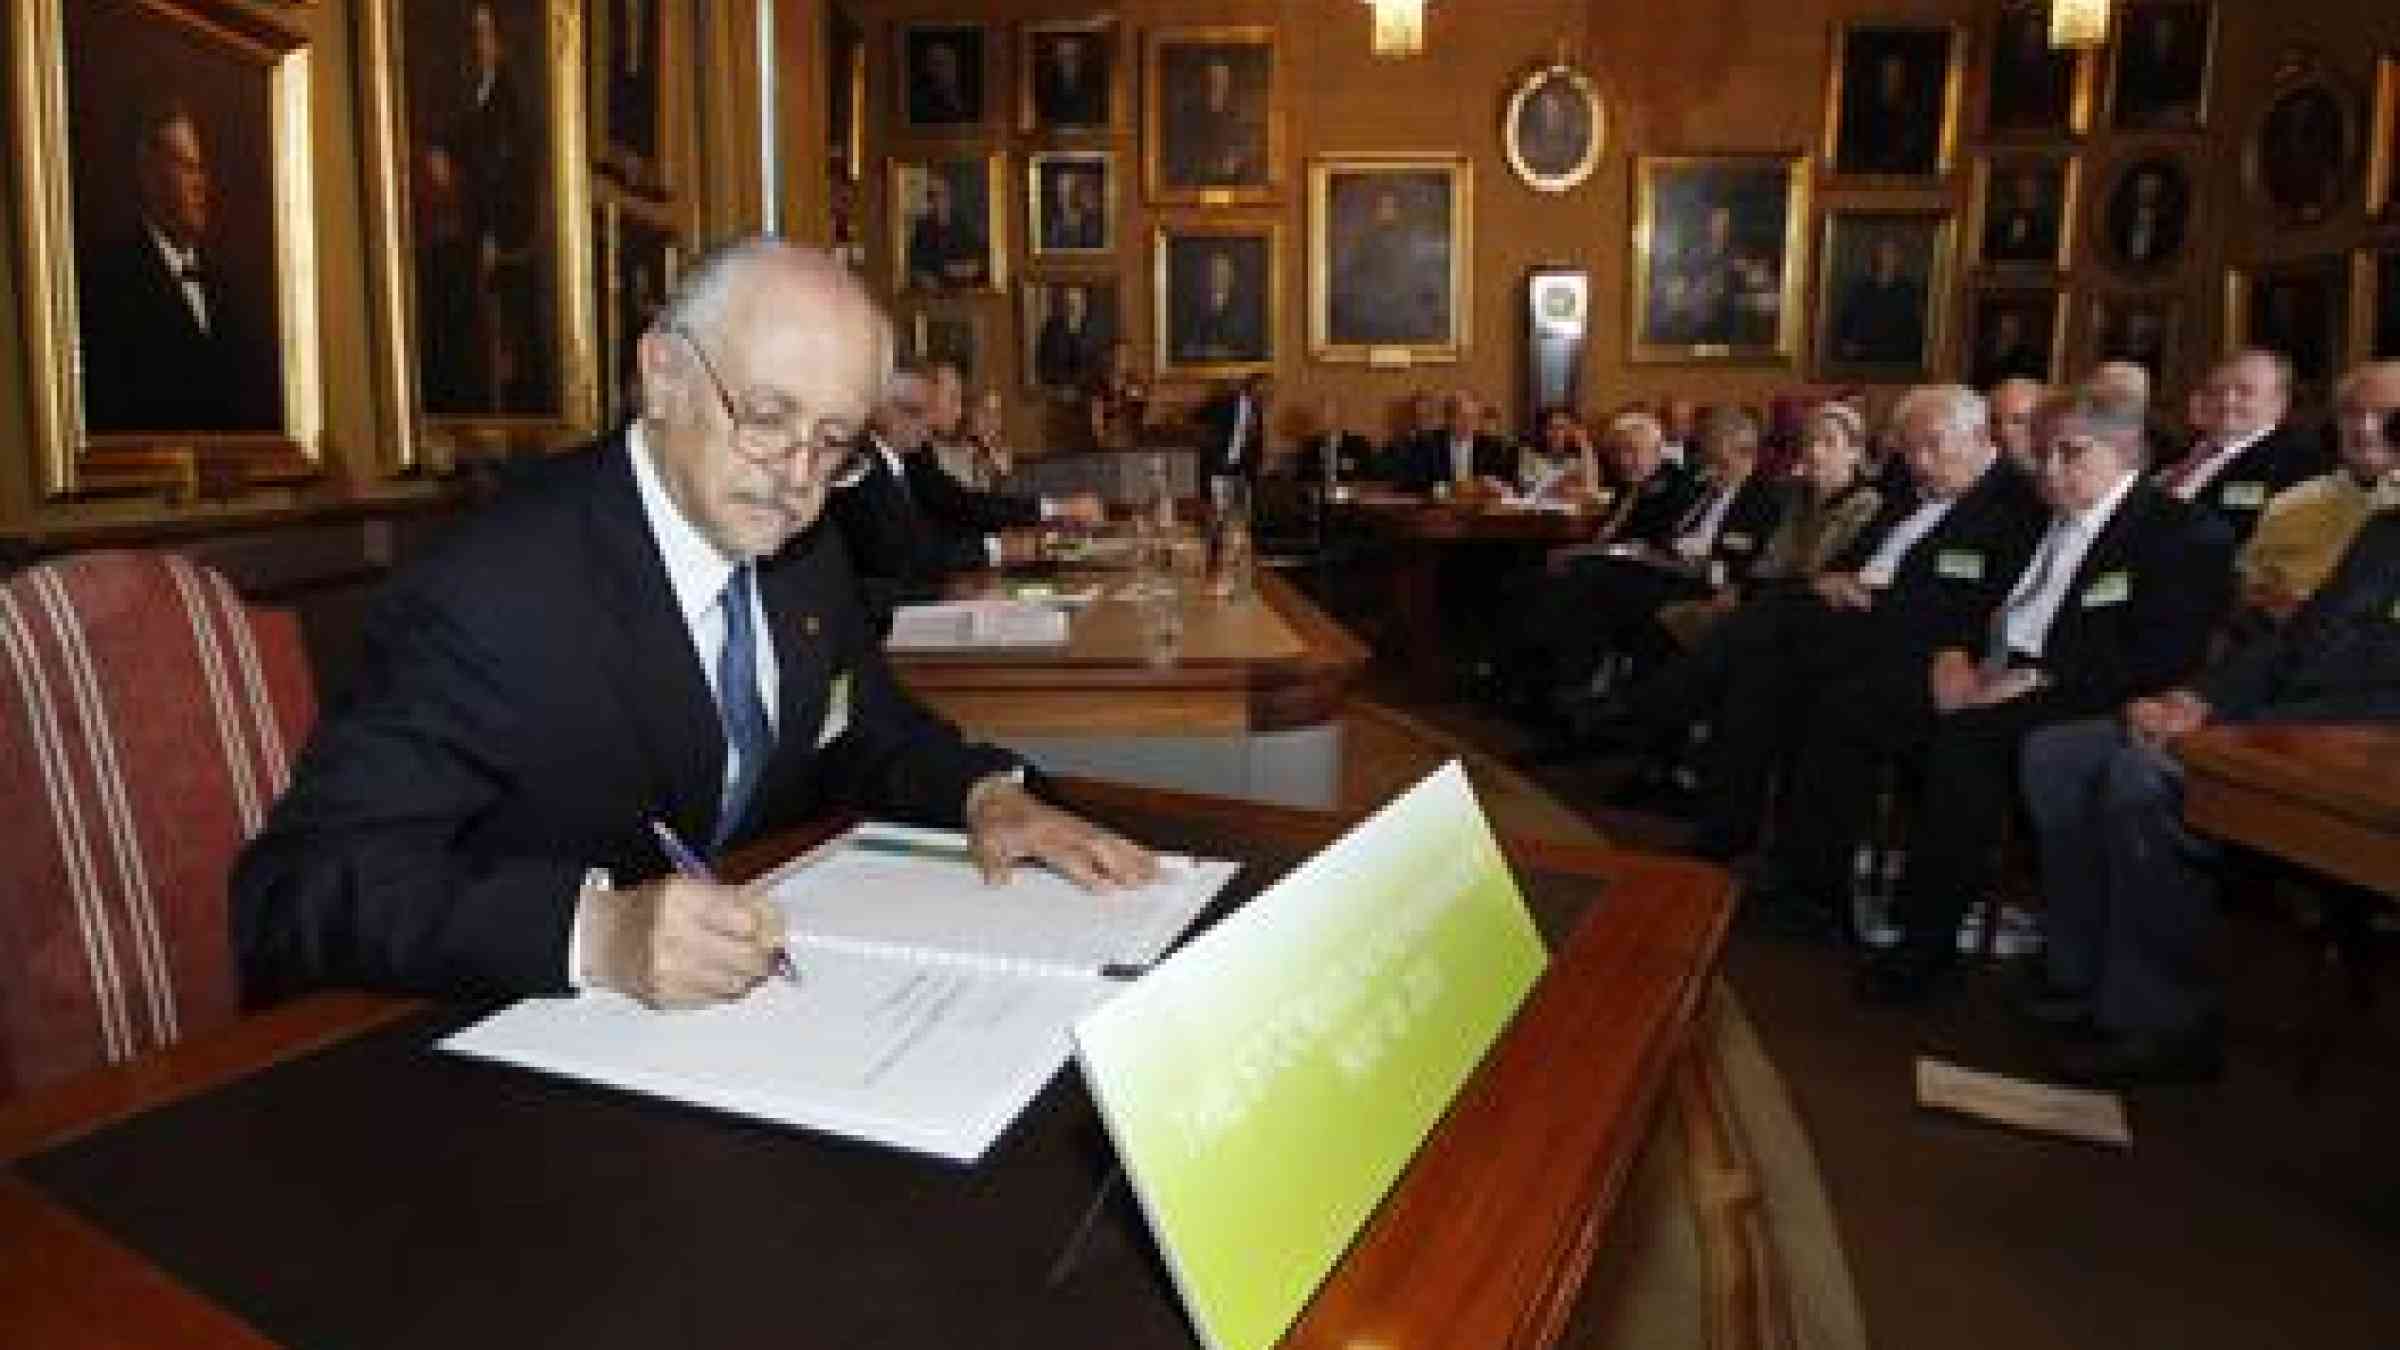 Nobel Laureate Mario J. Molina signs the Stockholm Memorandum at the 3rd Nobel Laureate Symposium on Global Sustainability in Stockholm between 16 and 19 May 2011 (Photography 3rd Noble Laureate Symposium/Steffan Nilsson)